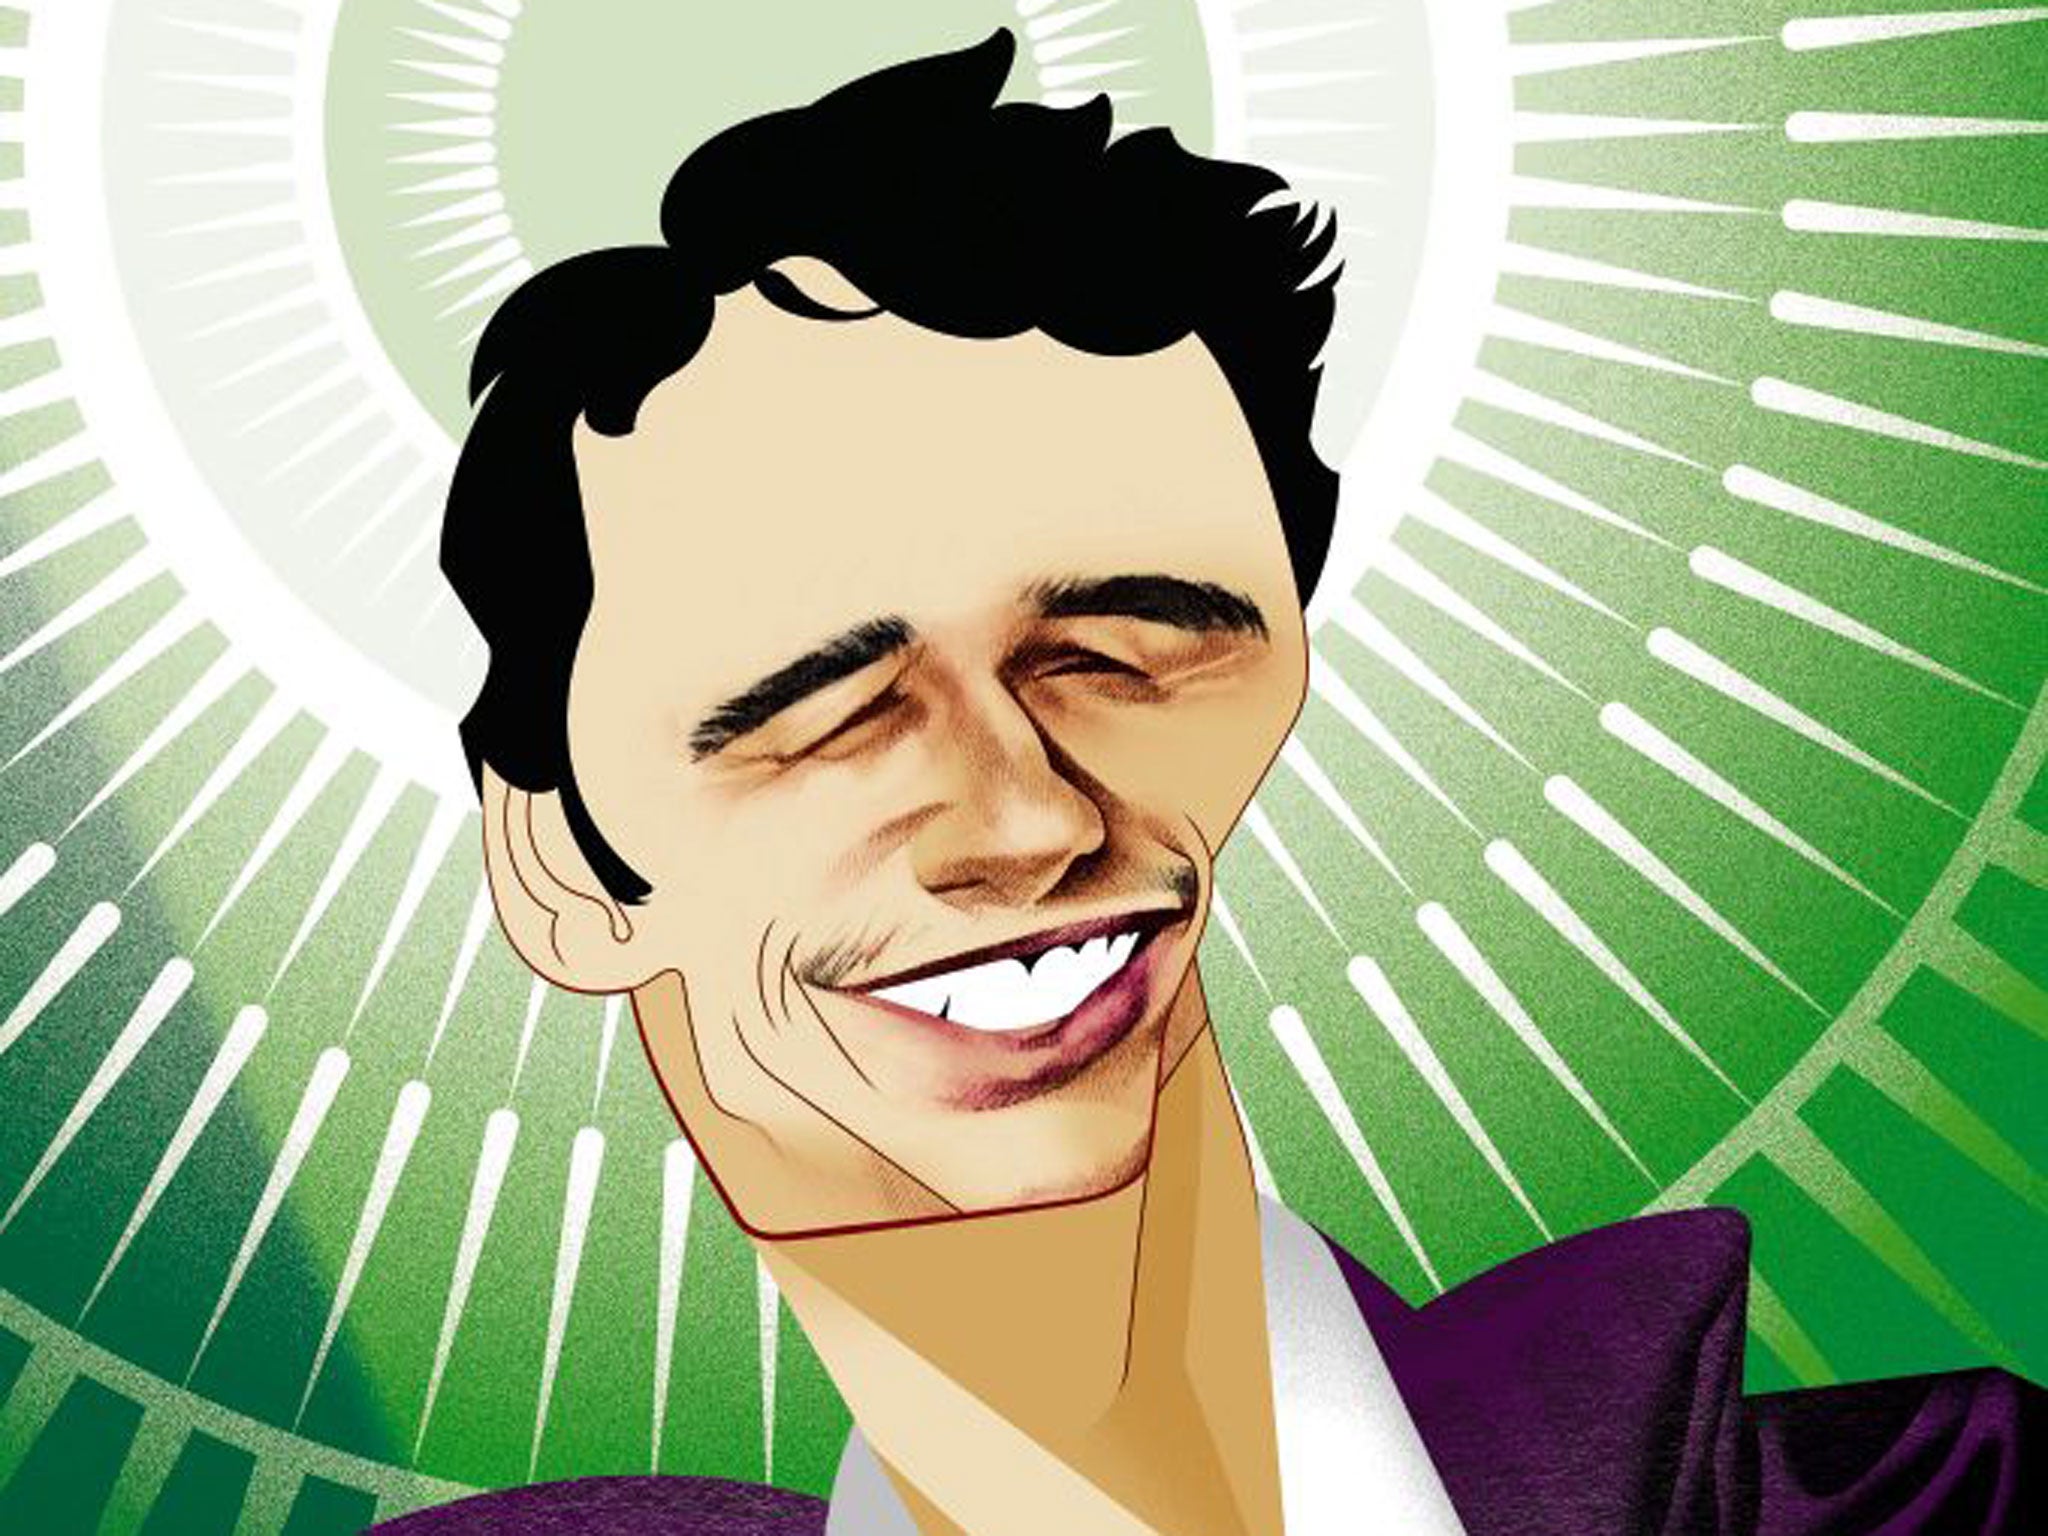 I need only mention James Franco, who combines the looks of James Dean, polymathic ambition of Stephen Fry and slacker demeanour of The Big Lebowski’s The Dude. And yet, he’s a proper pin-up